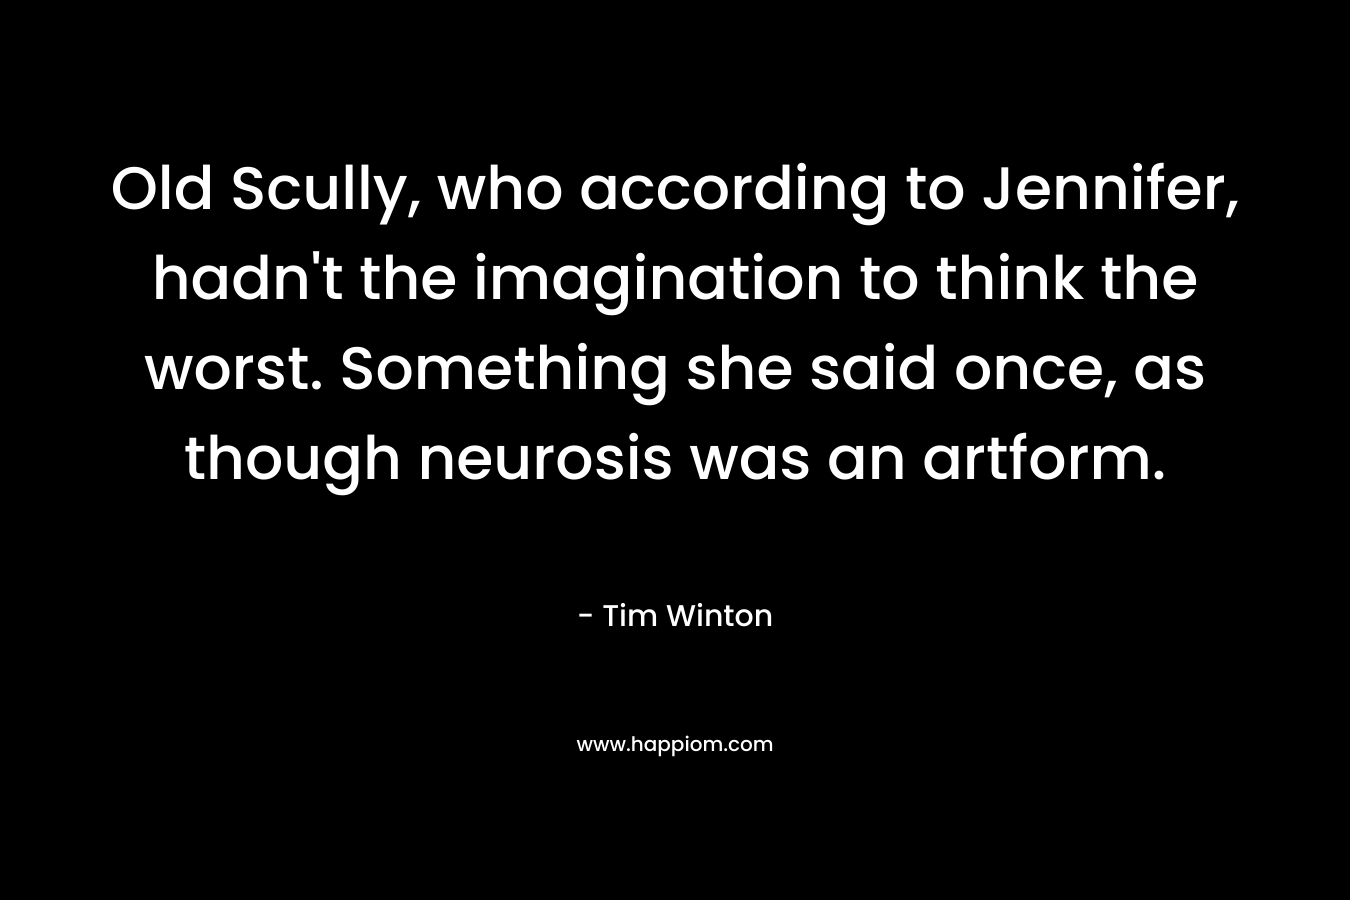 Old Scully, who according to Jennifer, hadn't the imagination to think the worst. Something she said once, as though neurosis was an artform.